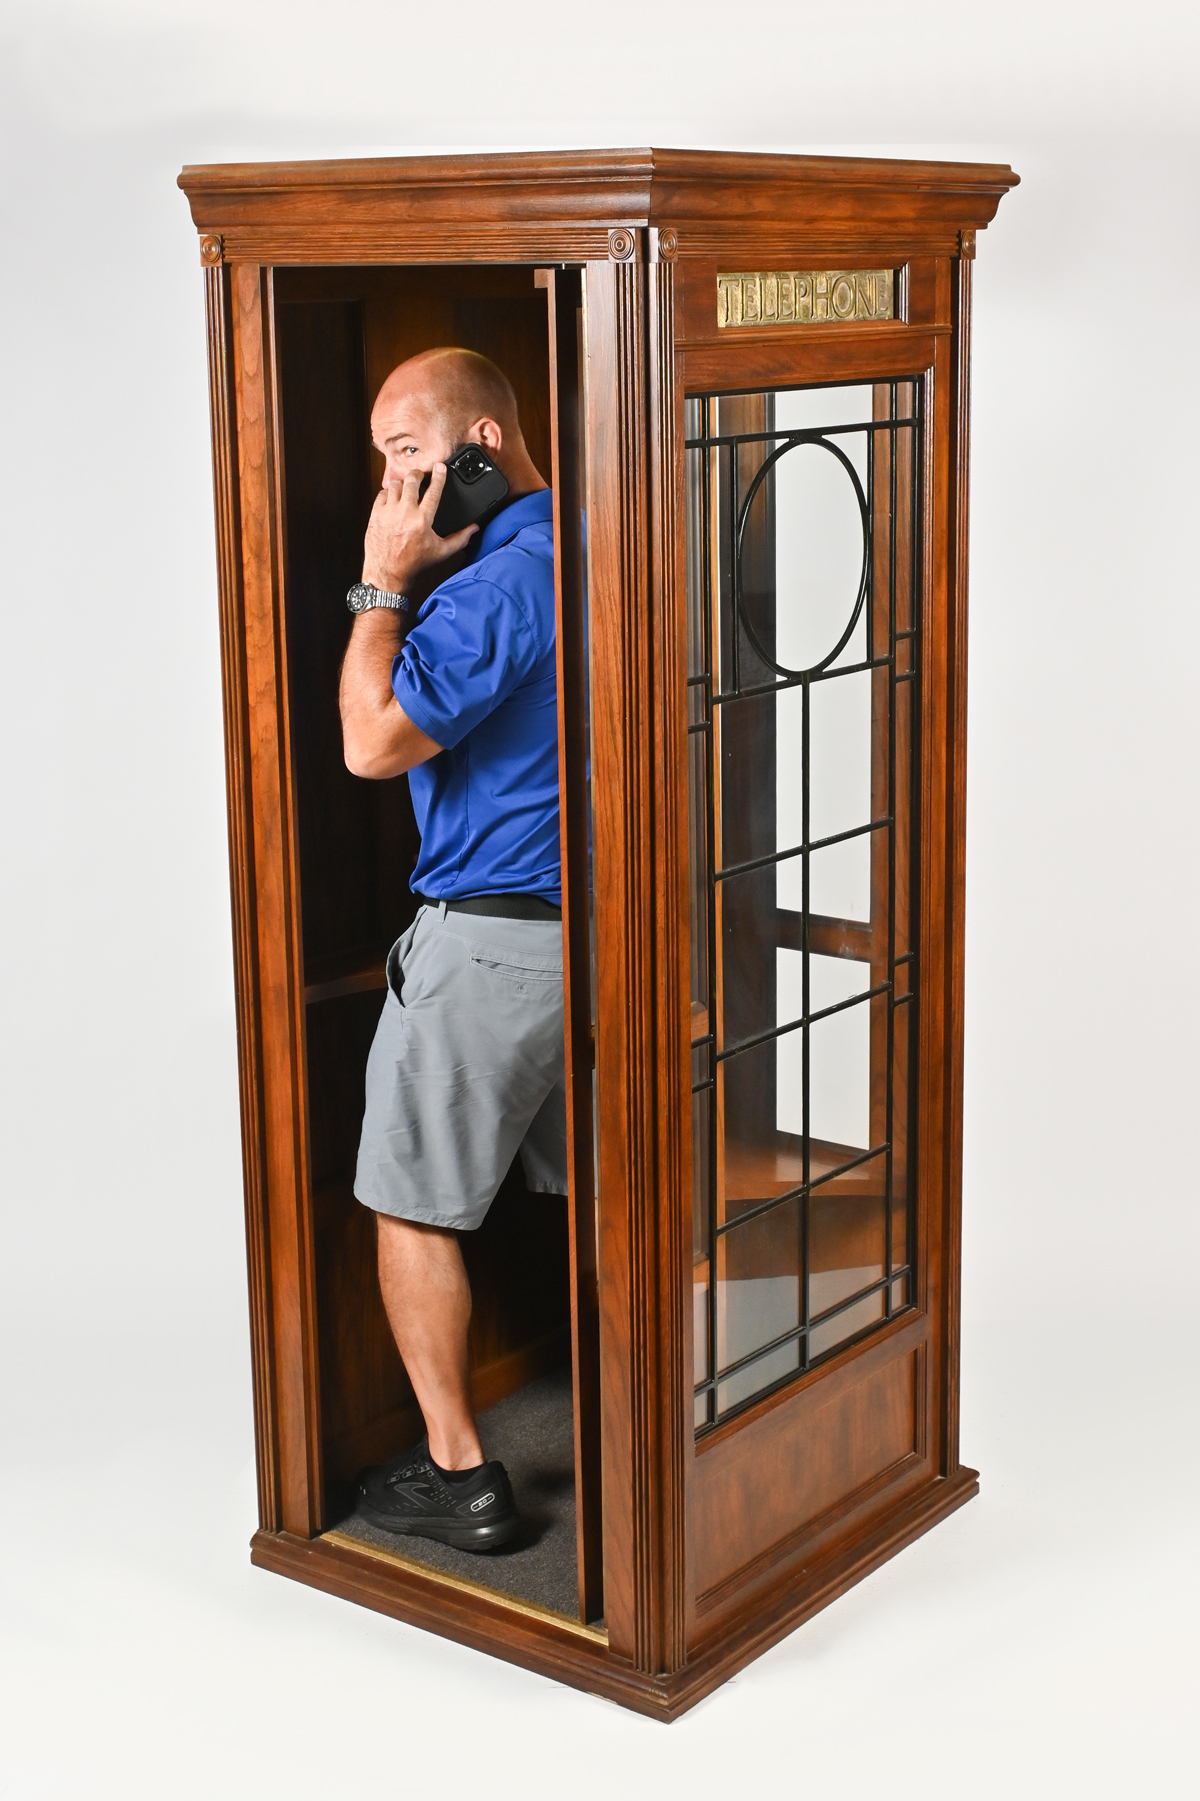 LEADED GLASS TELEPHONE BOOTH An 309ff3